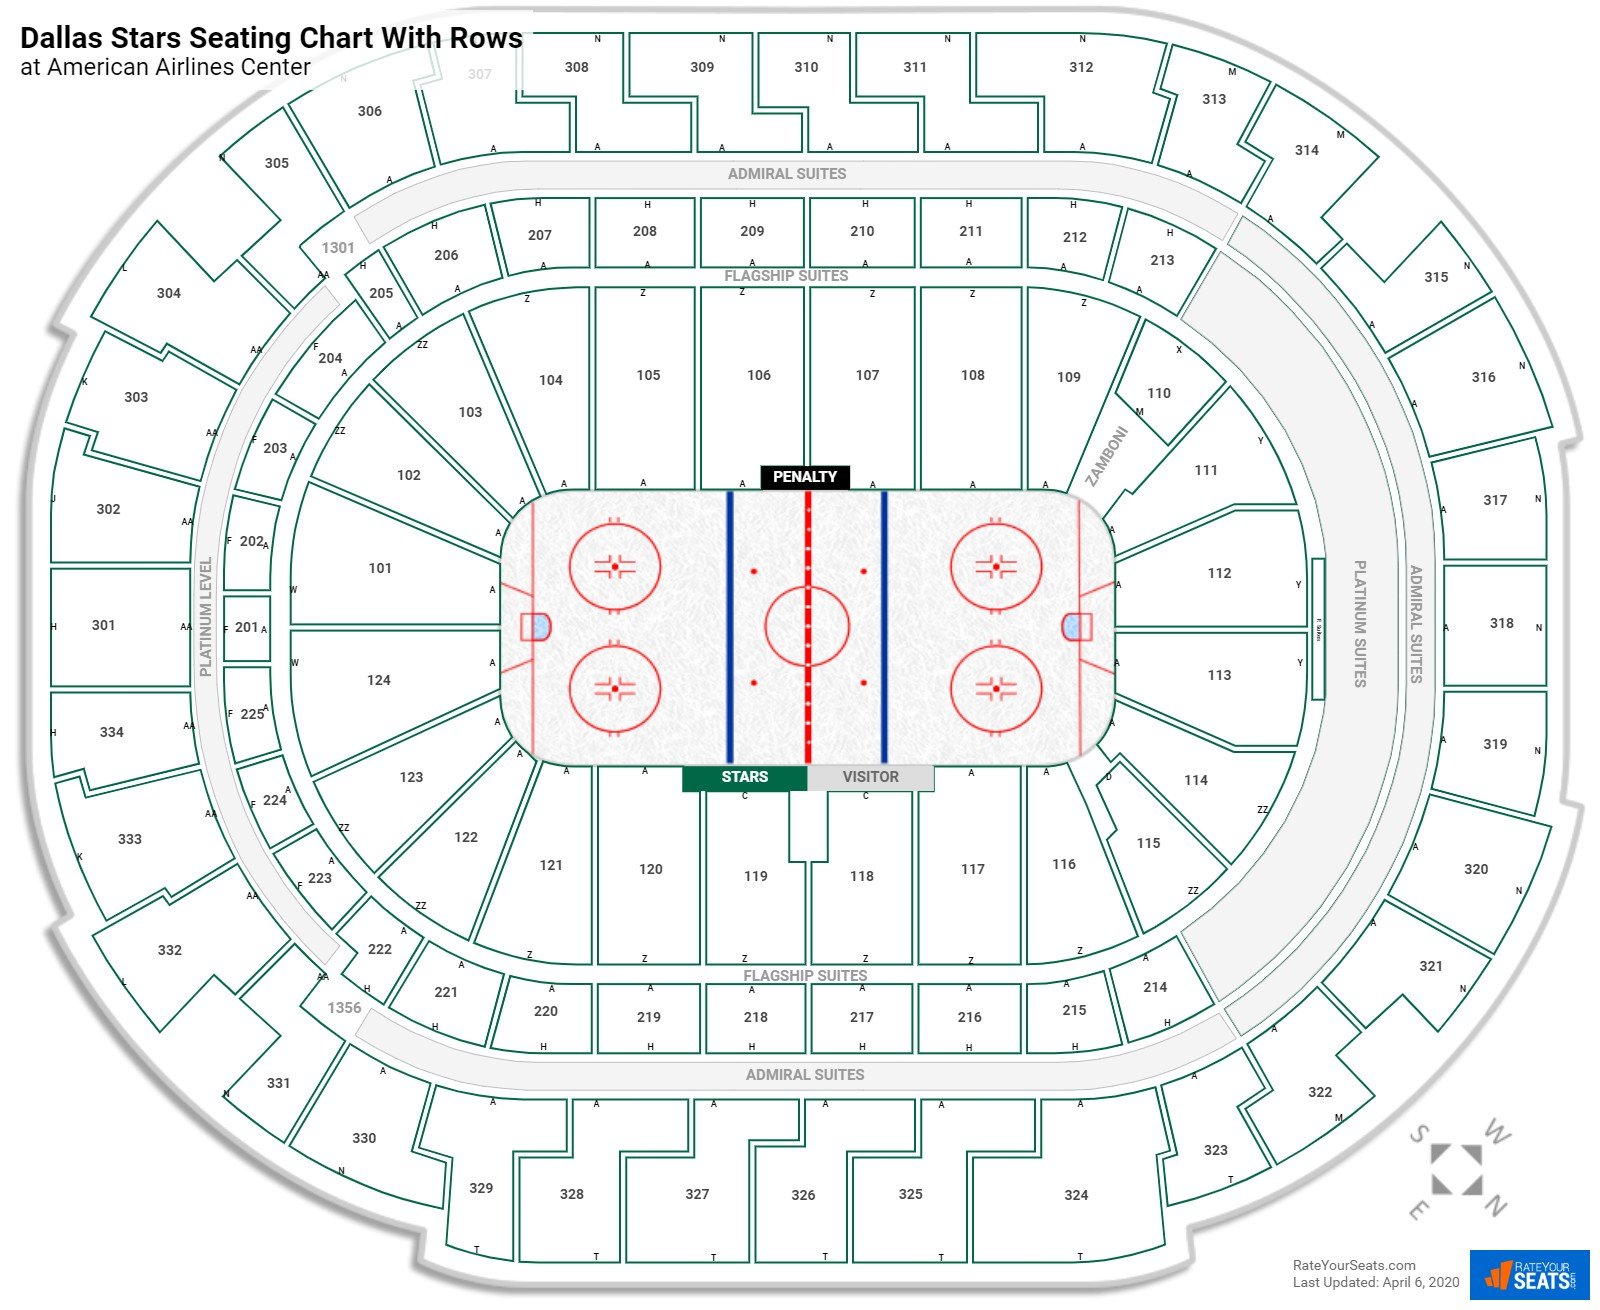 Dallas Stars Seating Charts at American Airlines Center